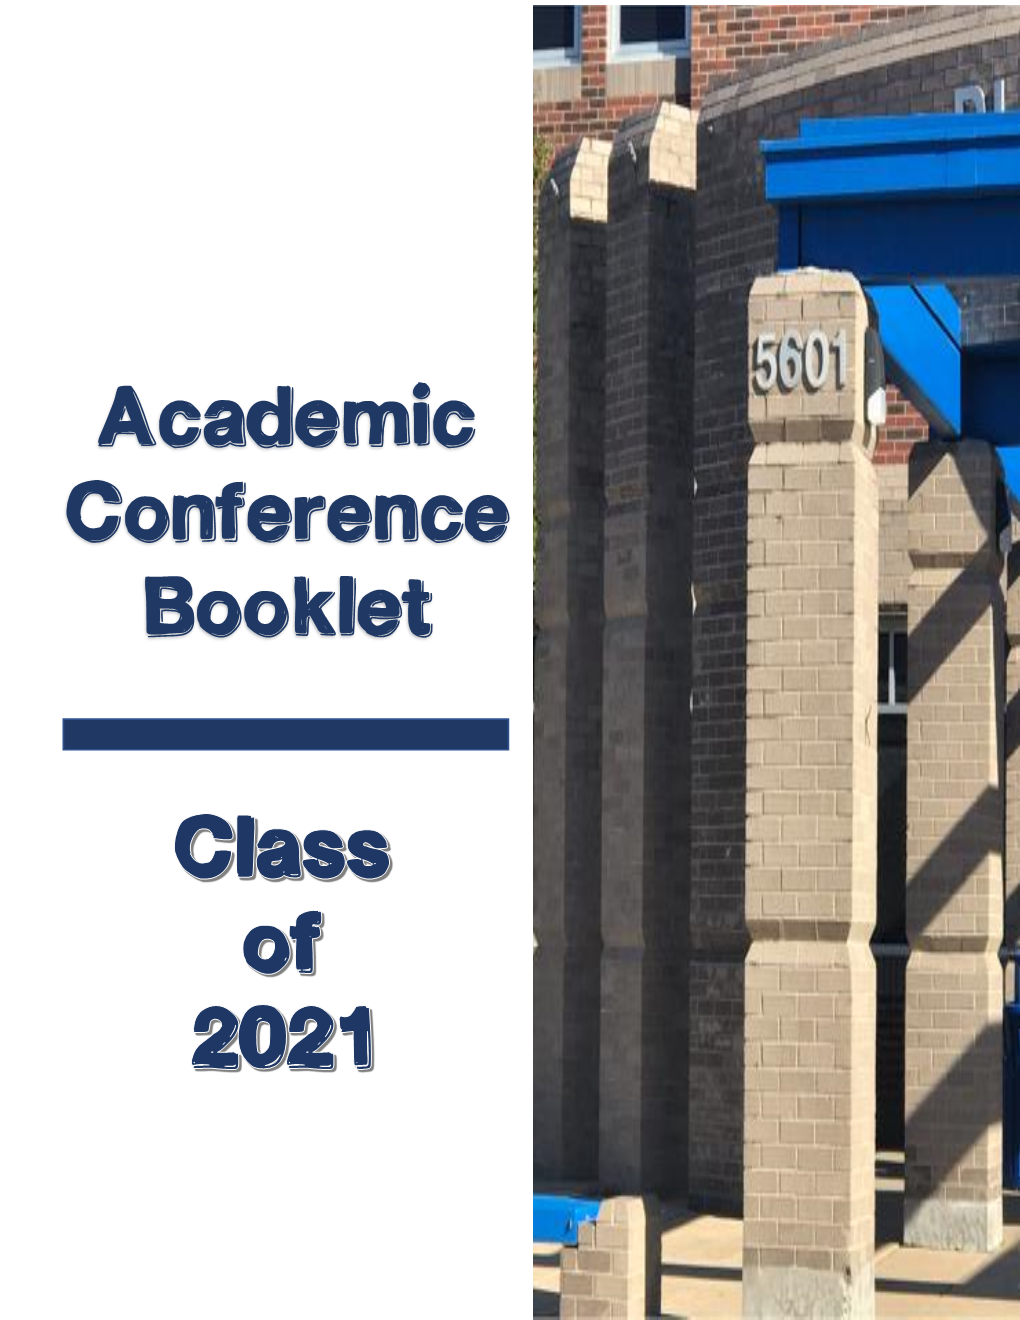 Academic Conference Booklet